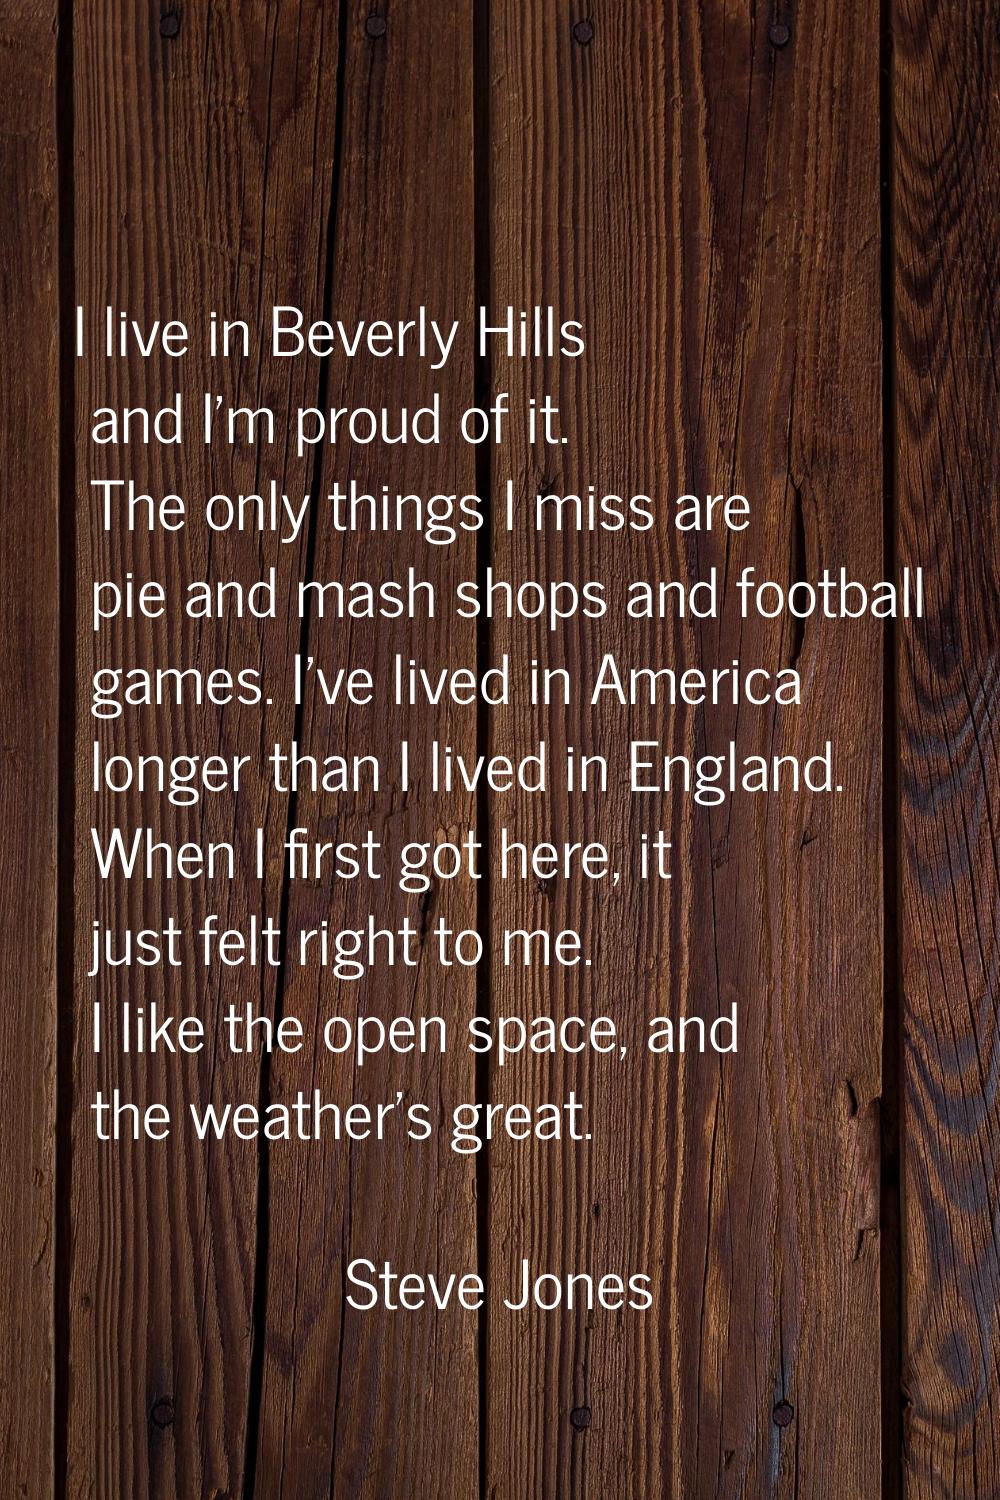 I live in Beverly Hills and I'm proud of it. The only things I miss are pie and mash shops and foot